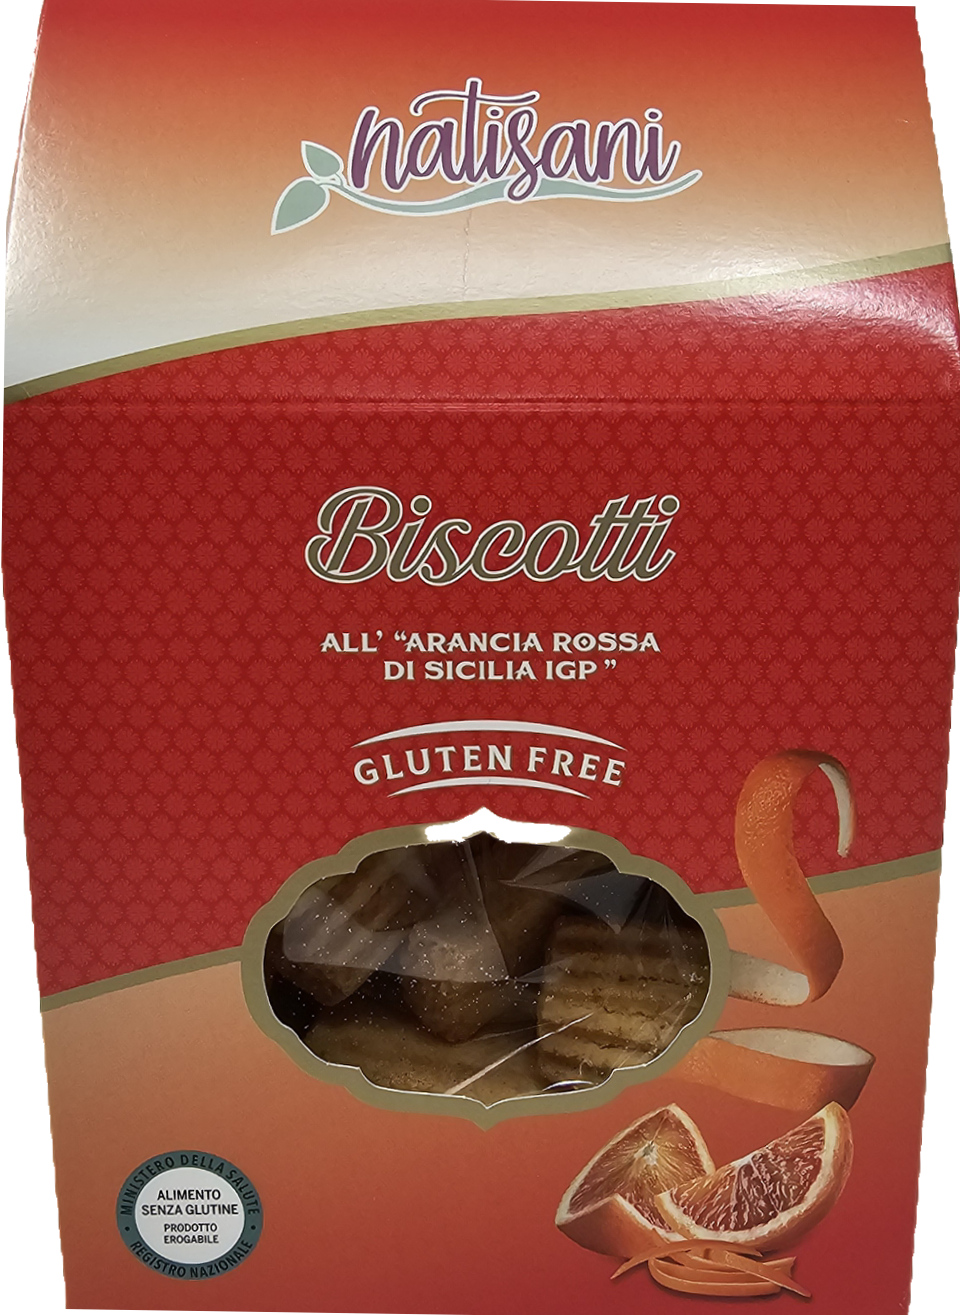 Orange Gluten Free Biscuits Imported From Italy - 2 Pack - 200 grams each